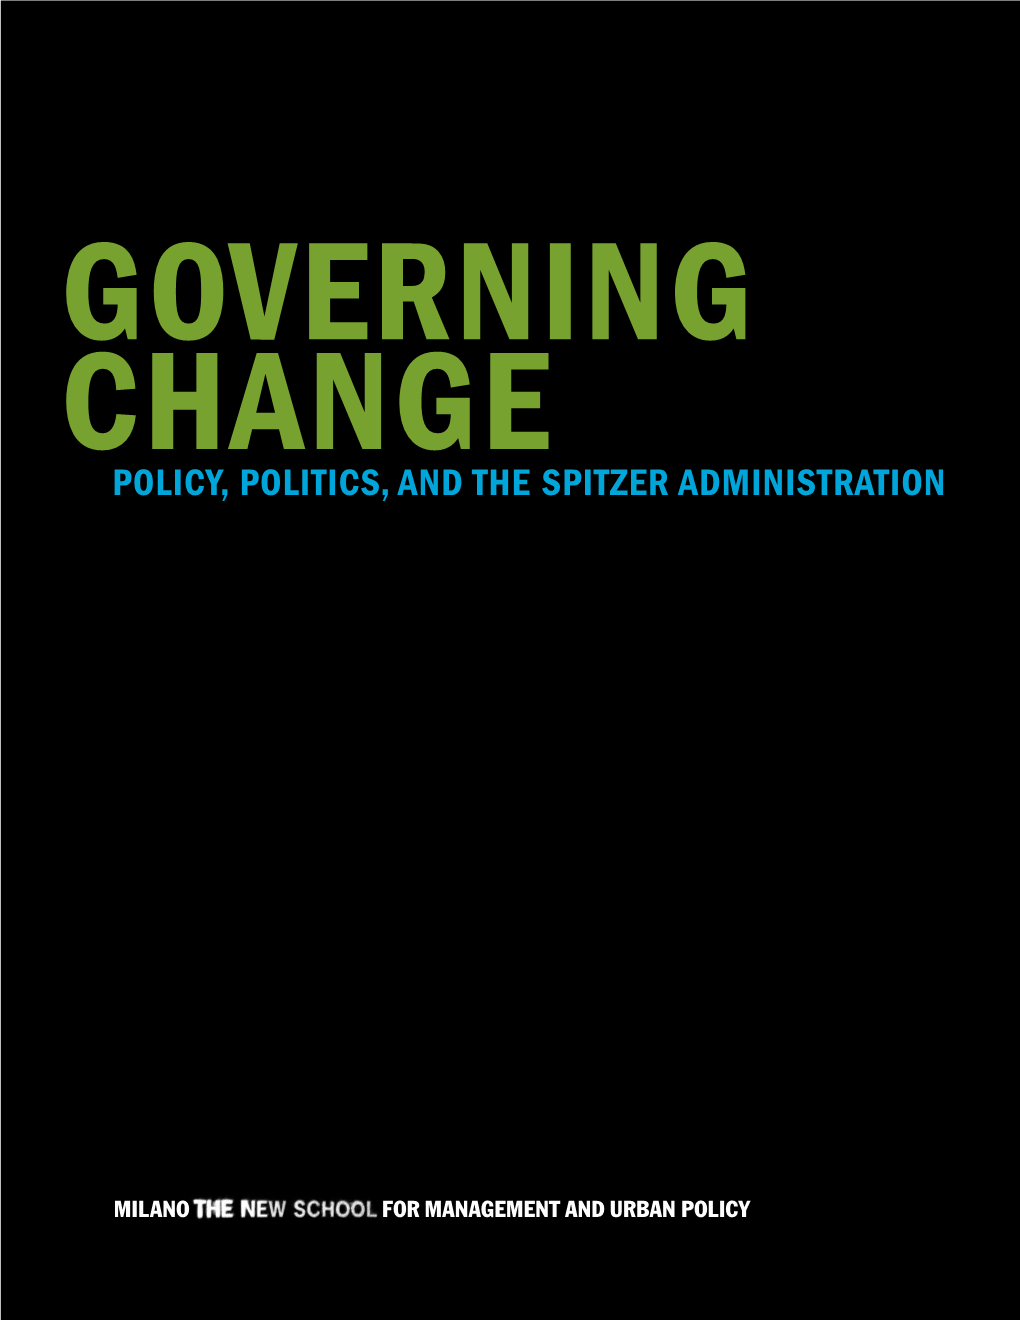 Policy, Politics, and the Spitzer Administration